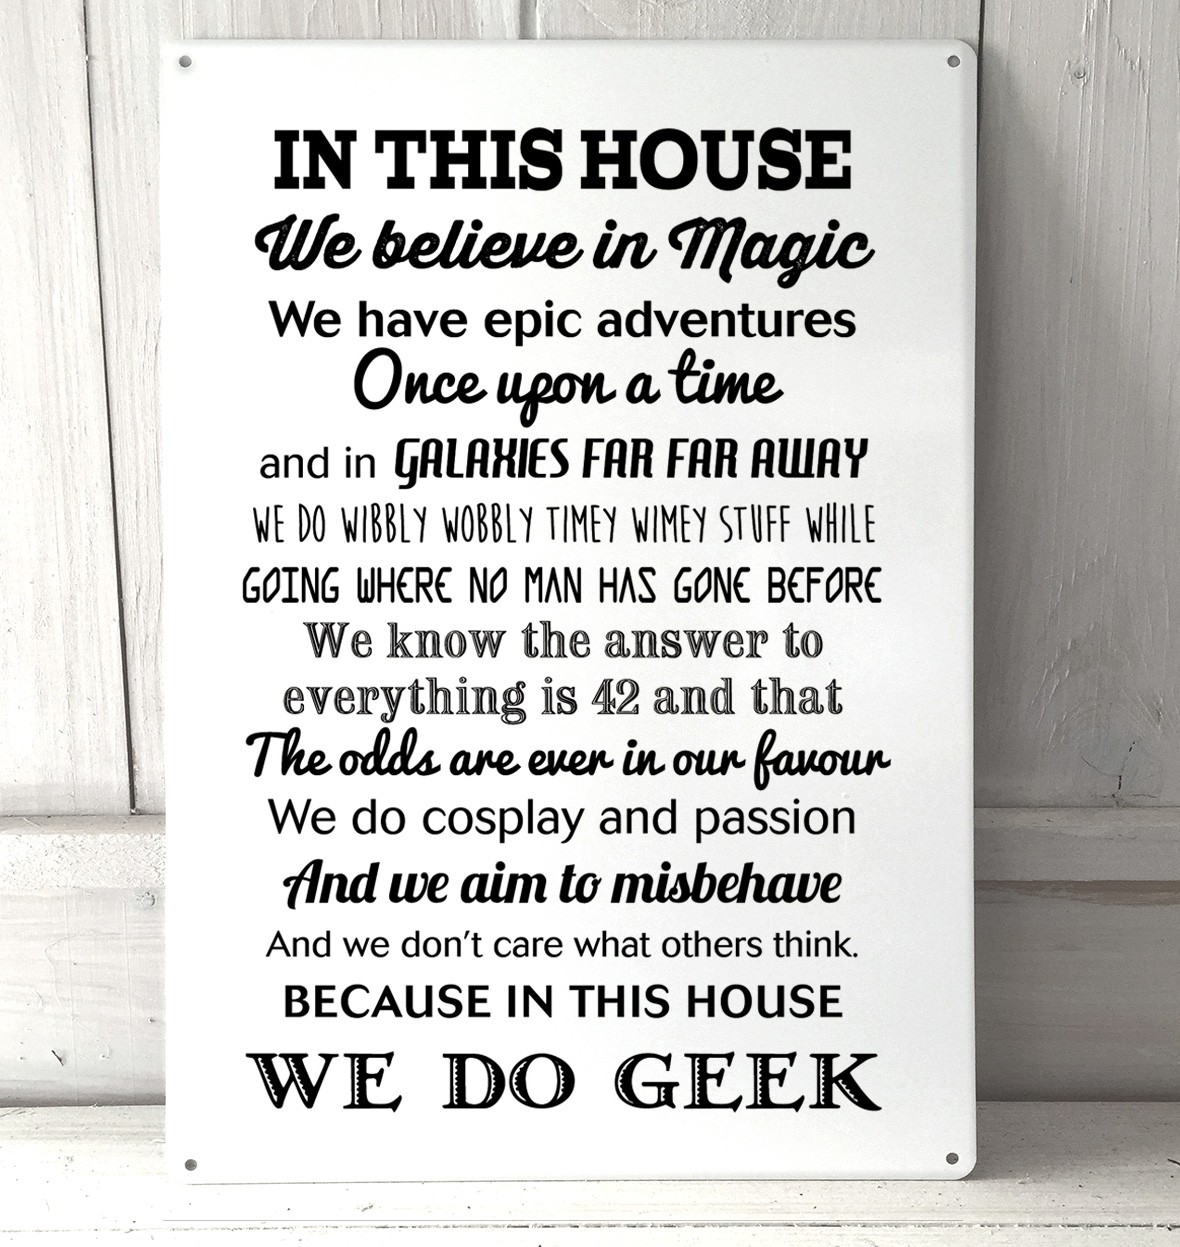 Does this house to you. This is a House. We enjoy this House!we. Do you know..in this House. Geeky House.